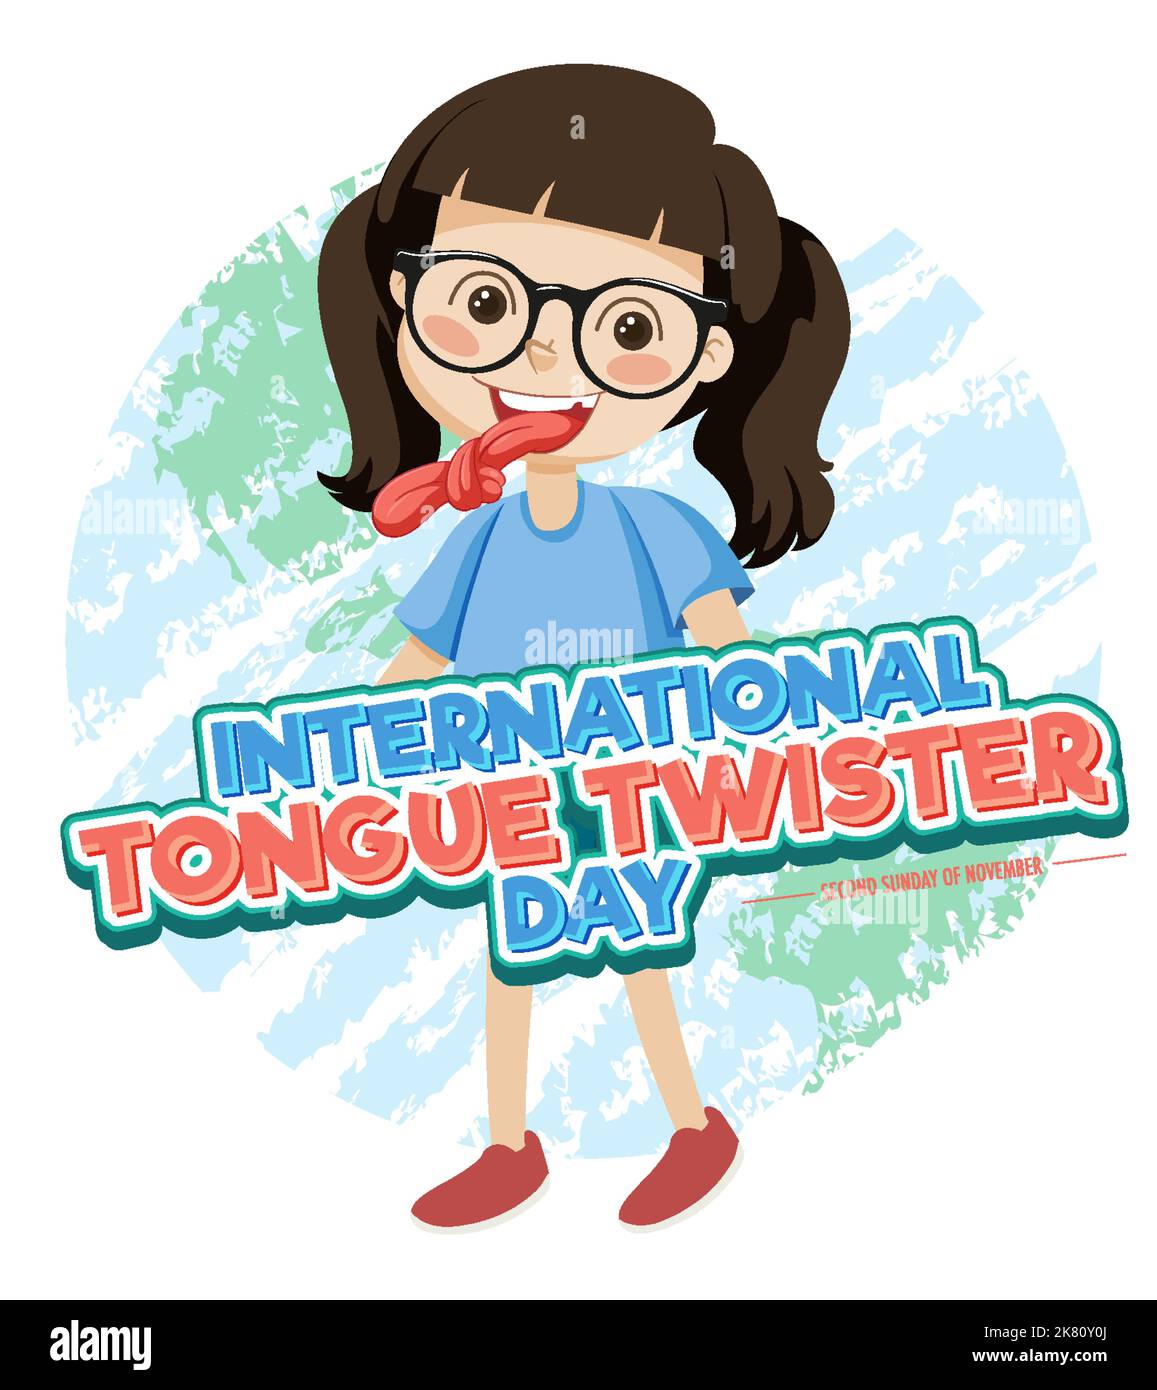 International Tongue Twister Day Banner Design Illustration Stock Vector Image And Art Alamy